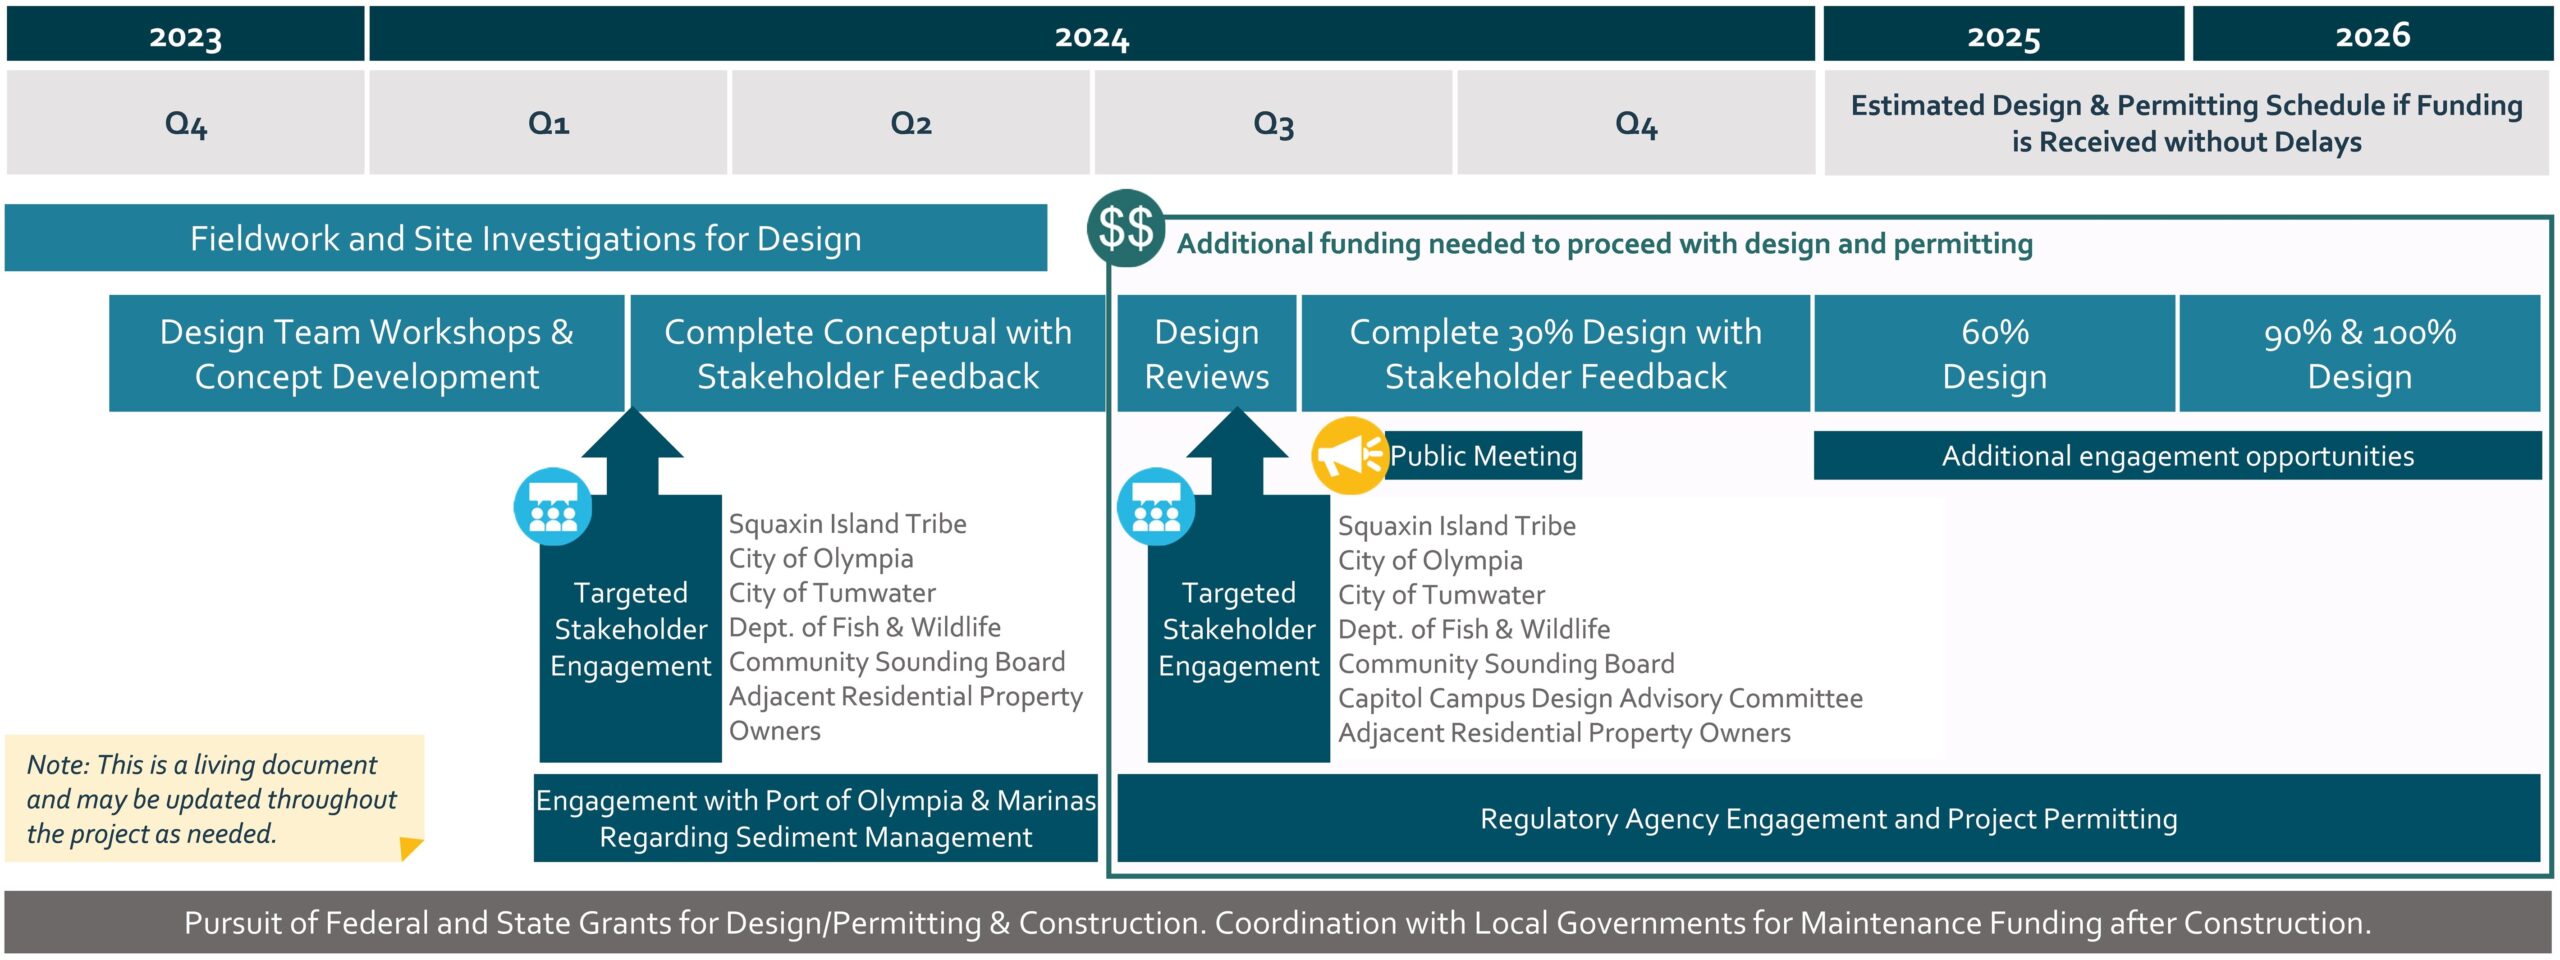 A graphical timeline depicting planned design phases and stakeholder engagement. Fieldwork and site investigations will run from November 2024 through the middle of 2024. Conceptual design will occur between the end of 2023 through the middle of 2024, with targeted stakeholder engagement and engagement regarding sediment management. Additional funding is needed starting in quarter 3 of 2024. At that point, the project team will move into conceptual design review and 30% design, with additional stakeholder, regulatory agency, and public engagement. 60% design is estimated for 2025, and 90% and 100% design are slated for 2026. The team will continue to pursue federal and state grant funding throughout the project.